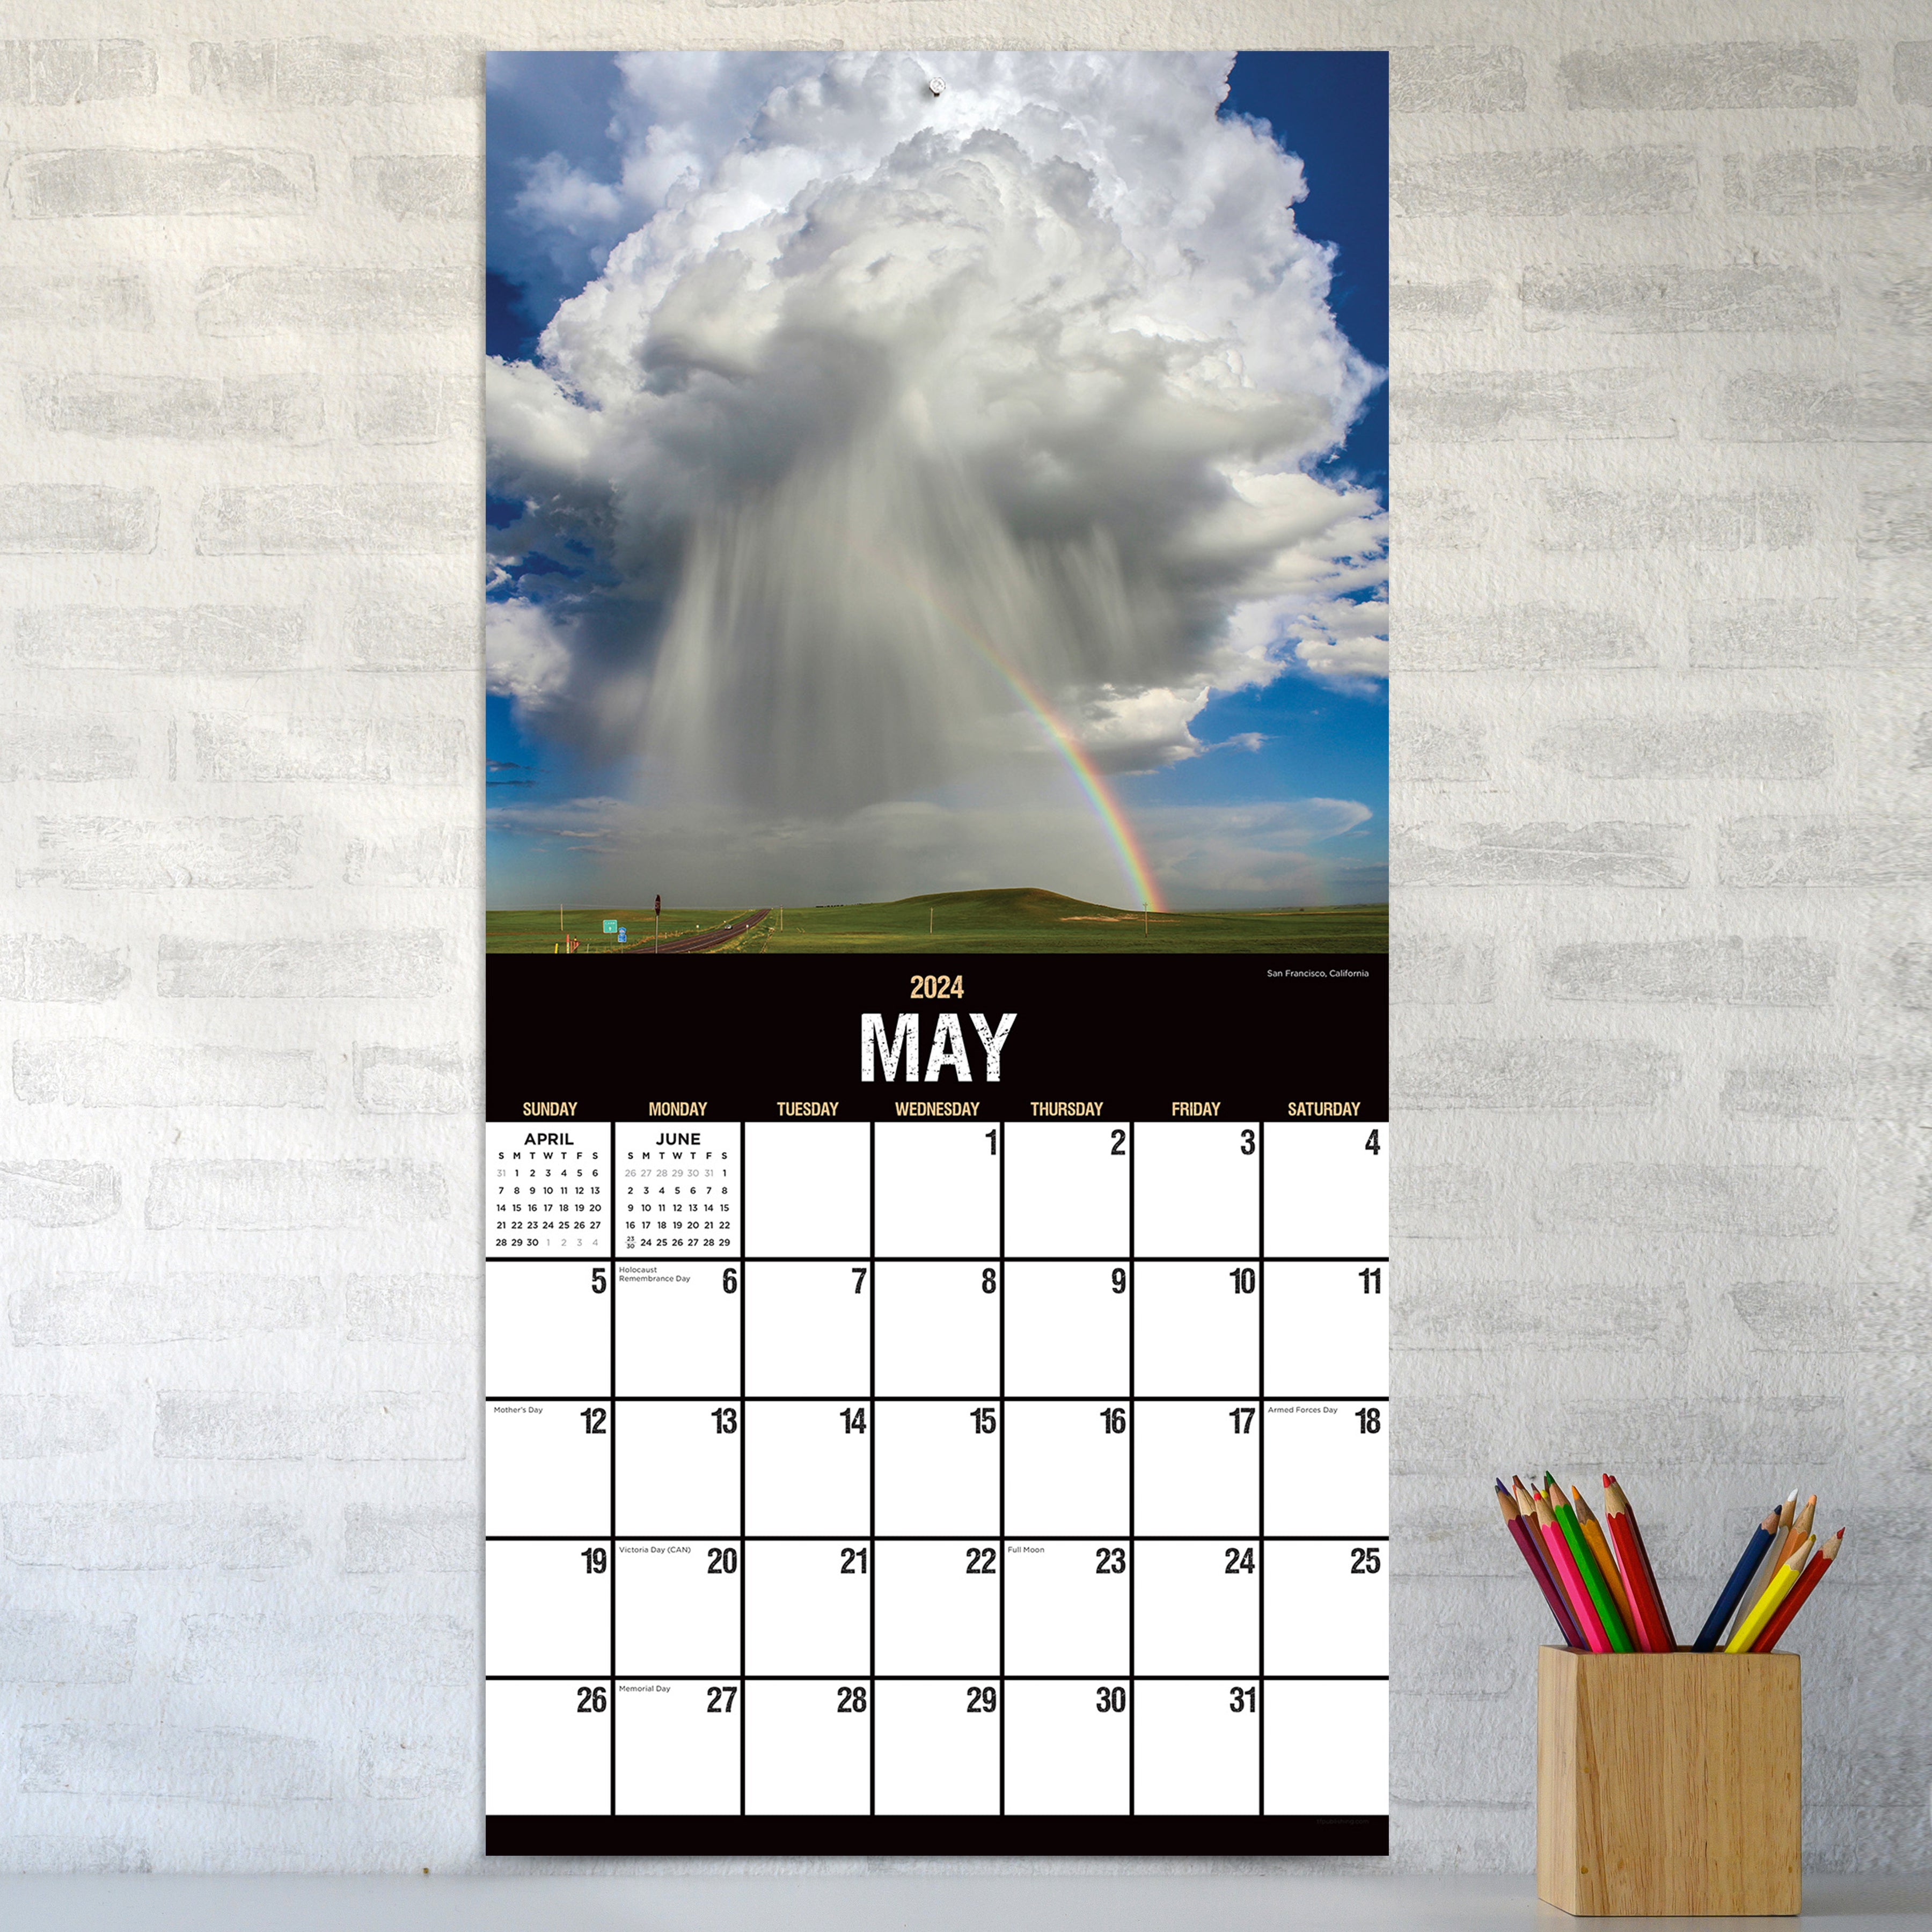 2024 Weather - Square Wall Calendar